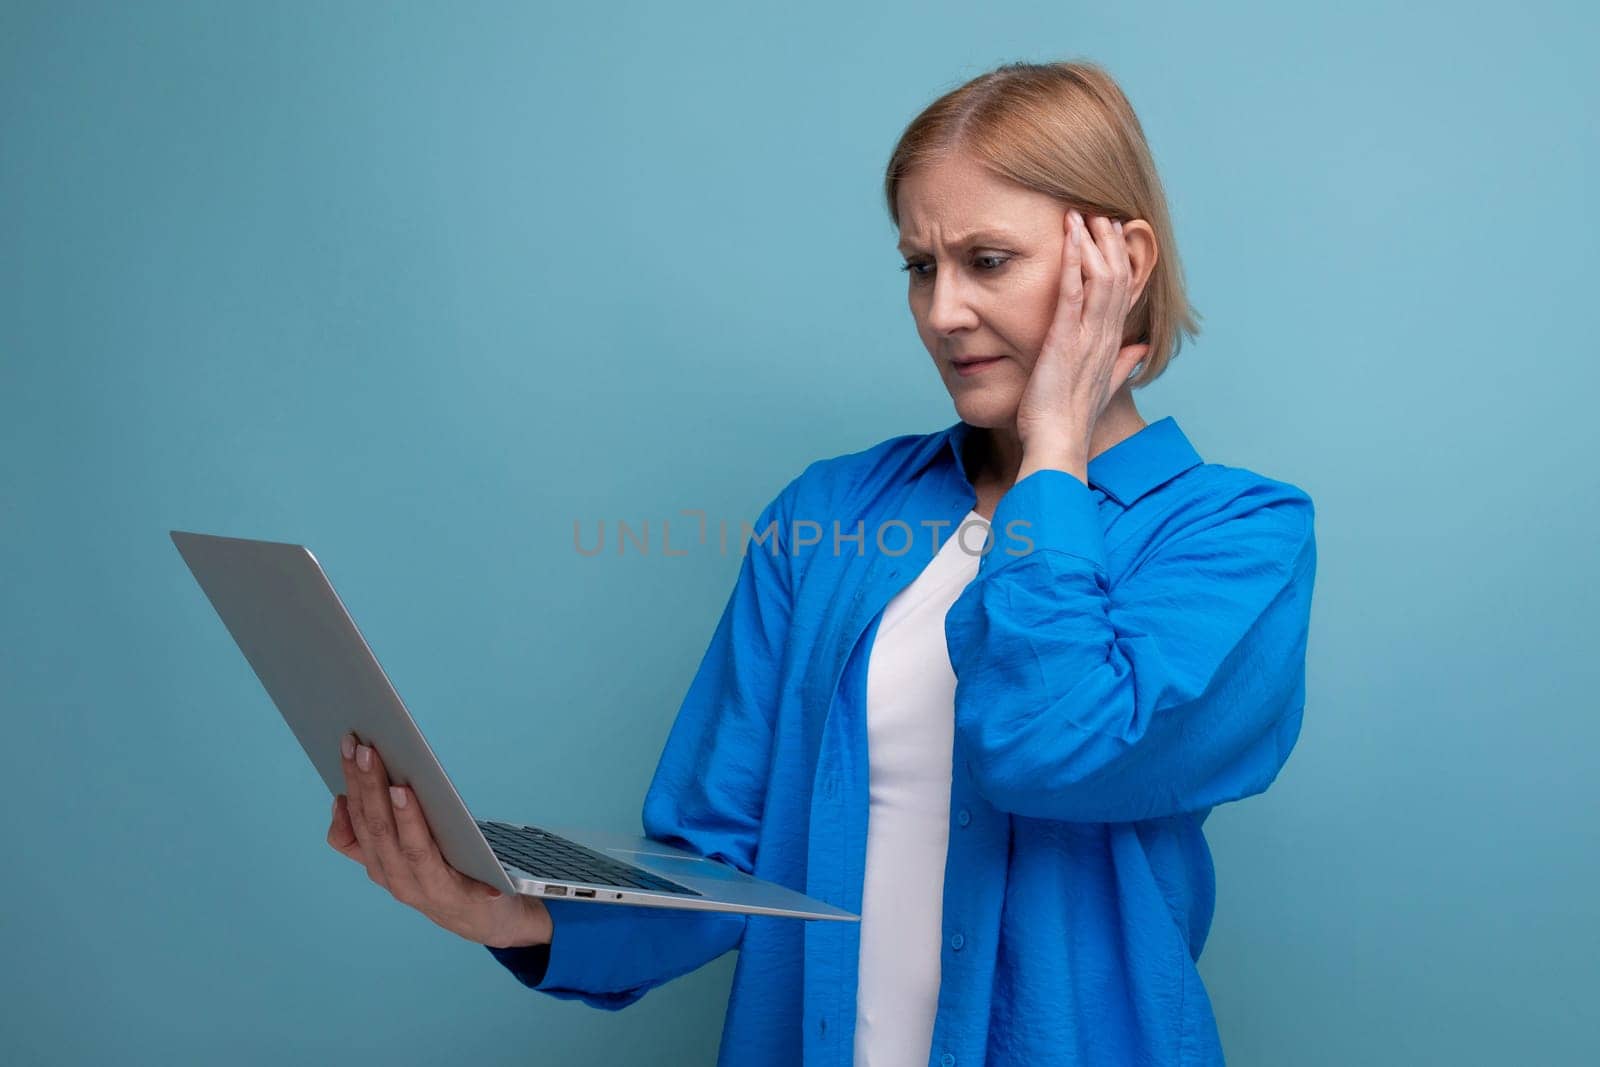 successful adult business woman demonstrates freelancer active work on blue background with copy space by TRMK